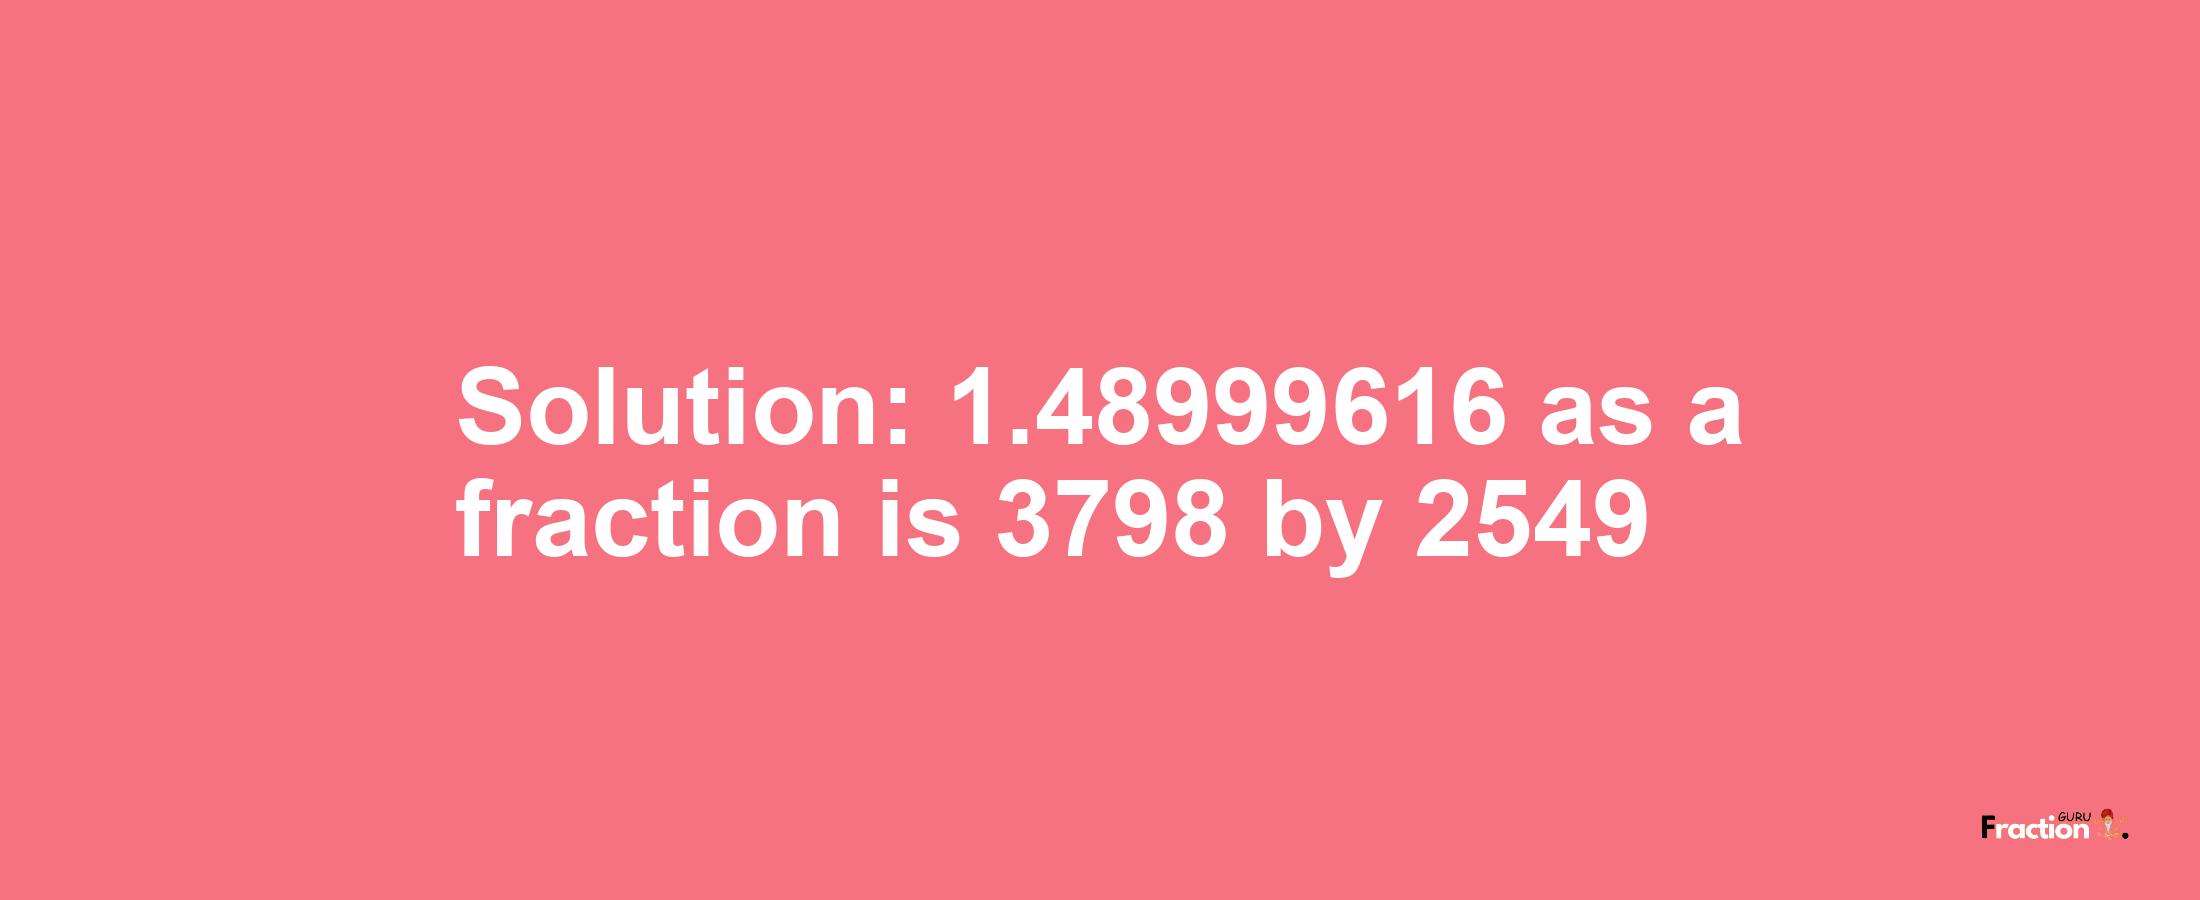 Solution:1.48999616 as a fraction is 3798/2549